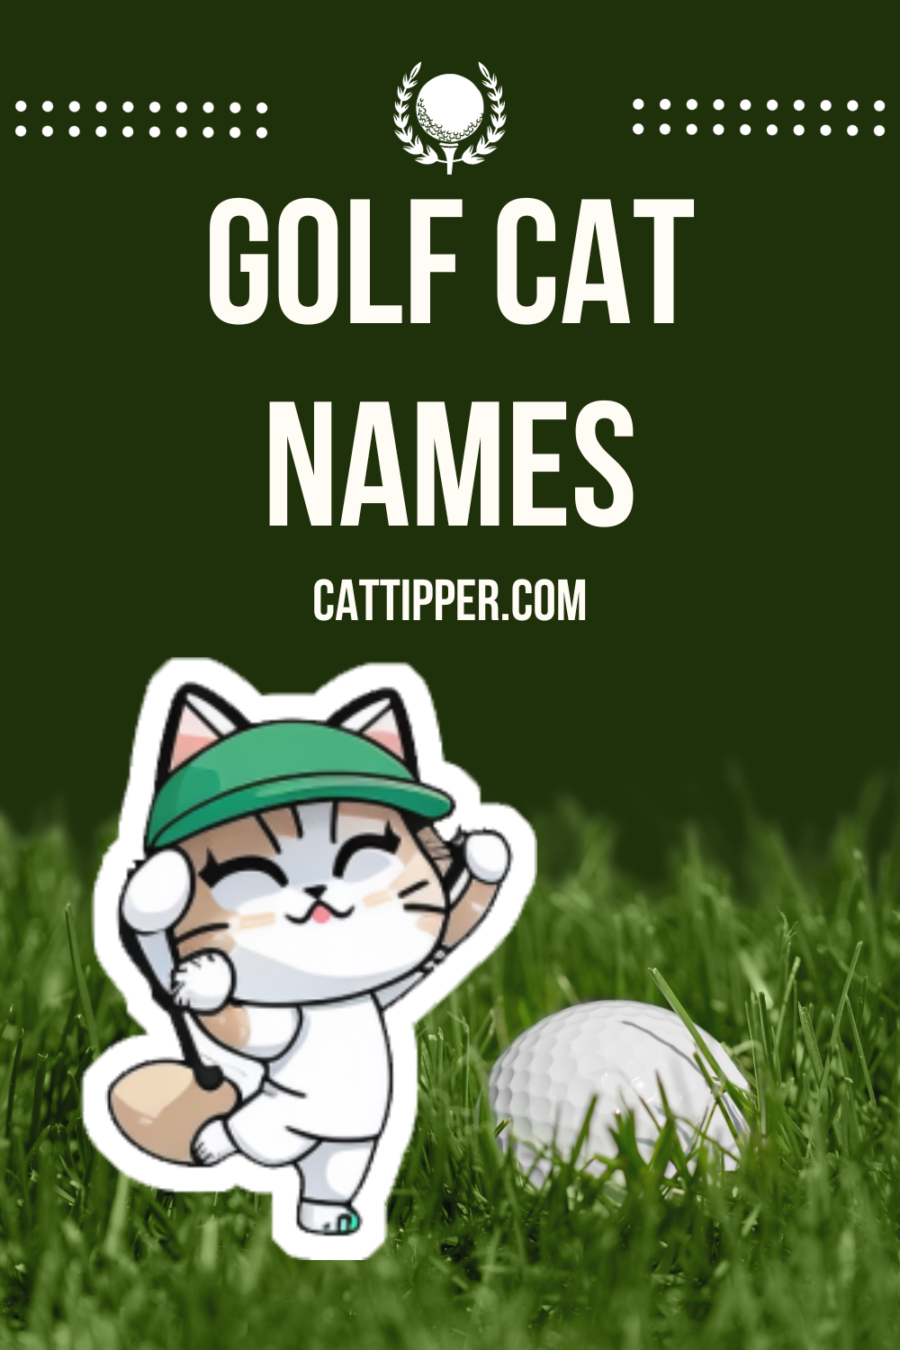 vertical image about golf cat names showing cartoon of cat playing golf